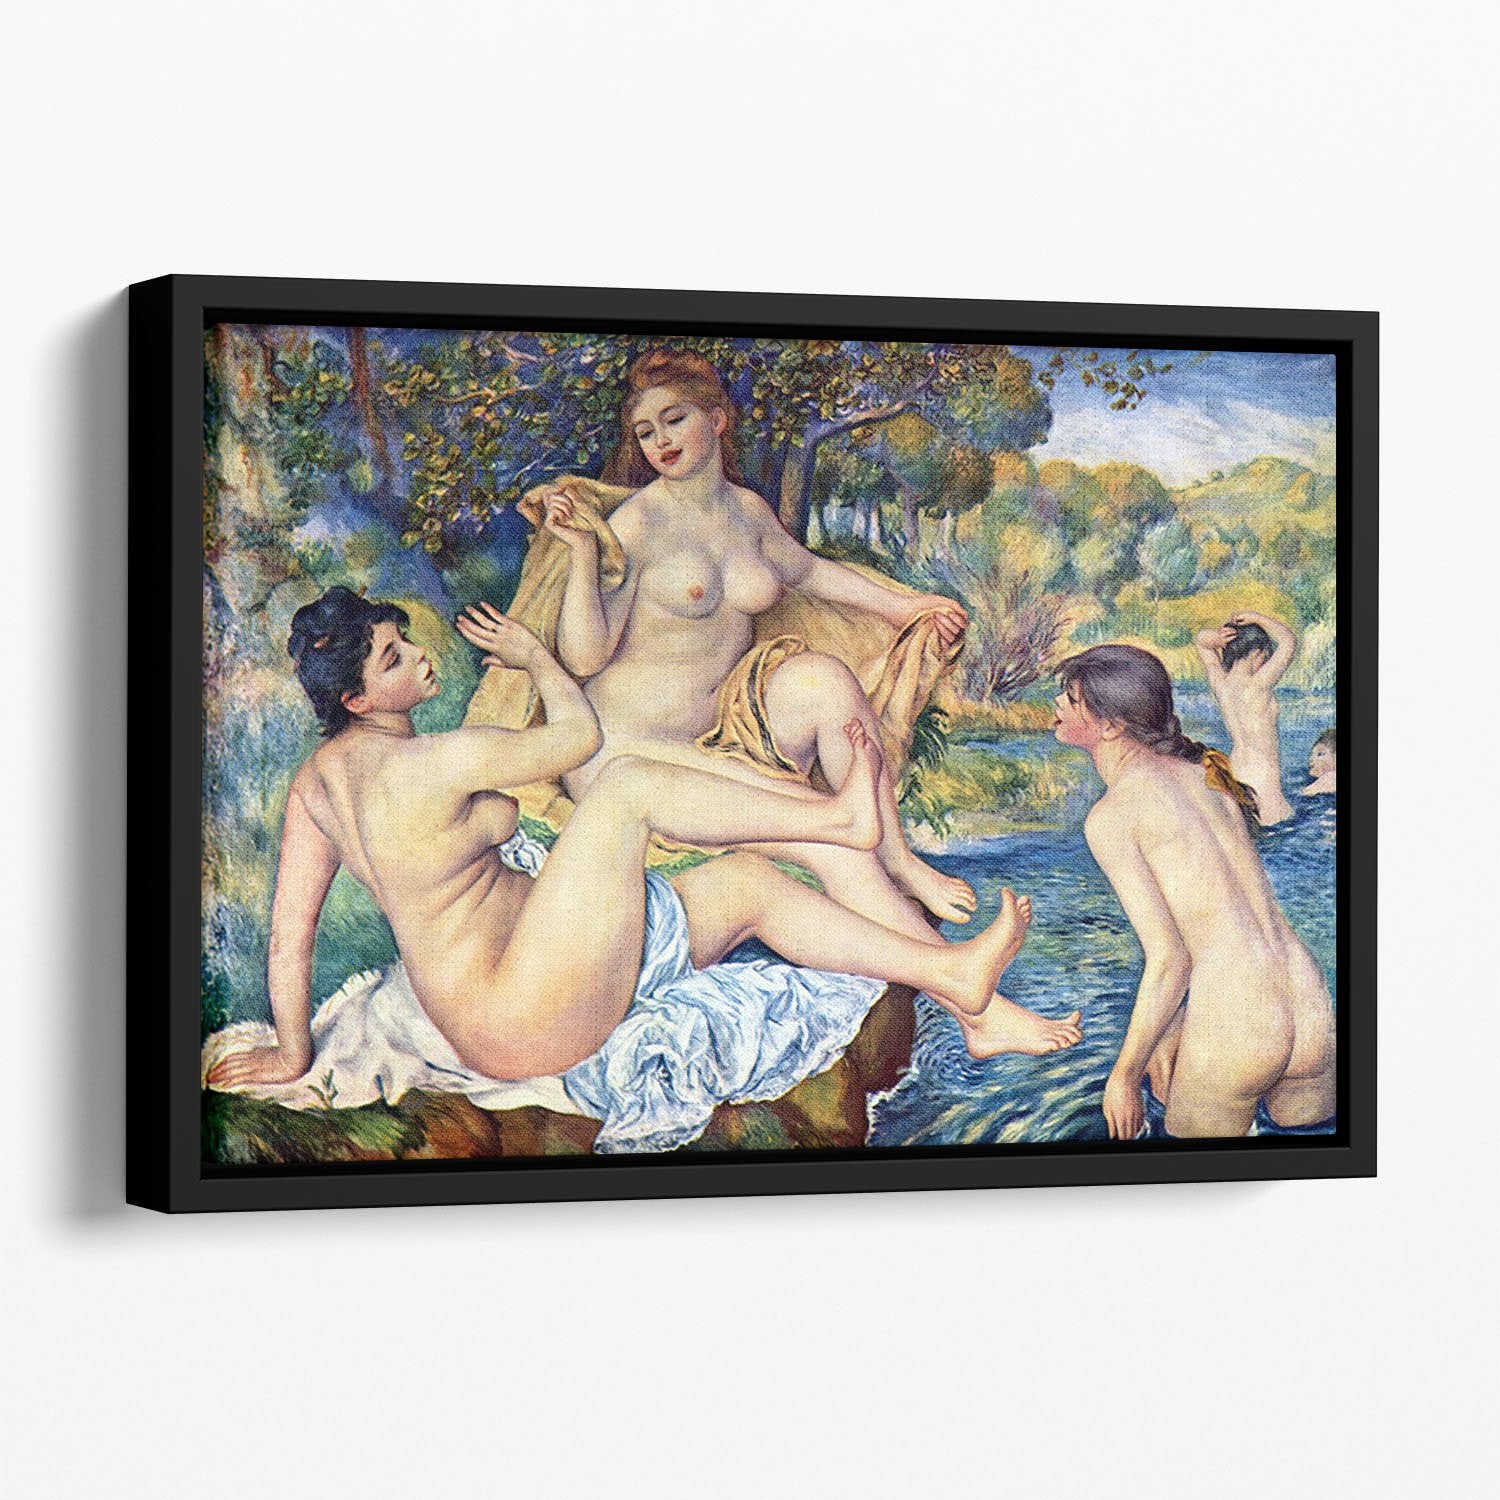 The Large Bathers by Renoir Floating Framed Canvas